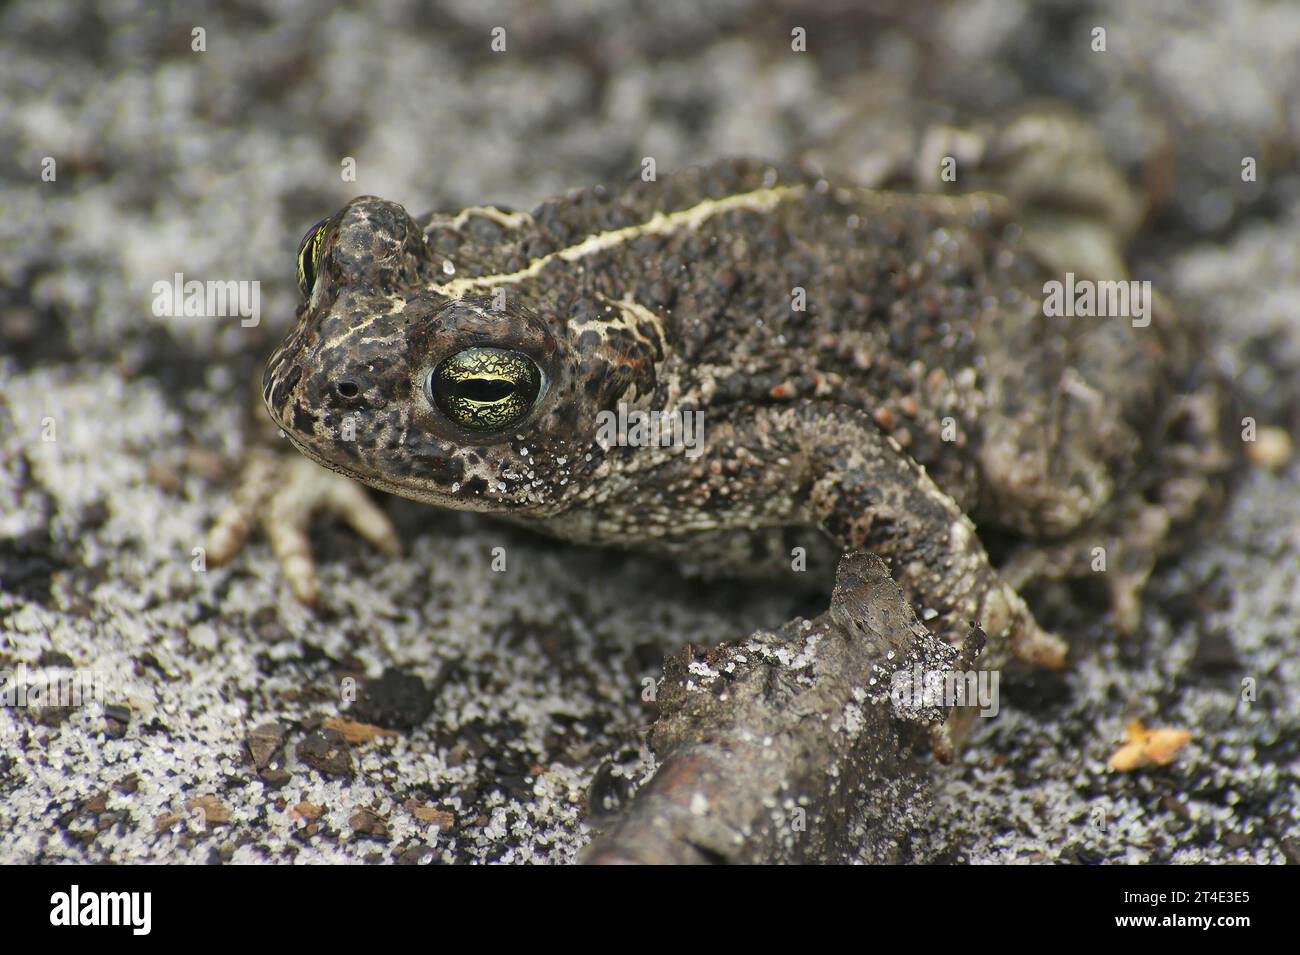 Natural closeup on an adult of the endangered European Natterjack toad, Bufo calamita sitting on the ground Stock Photo